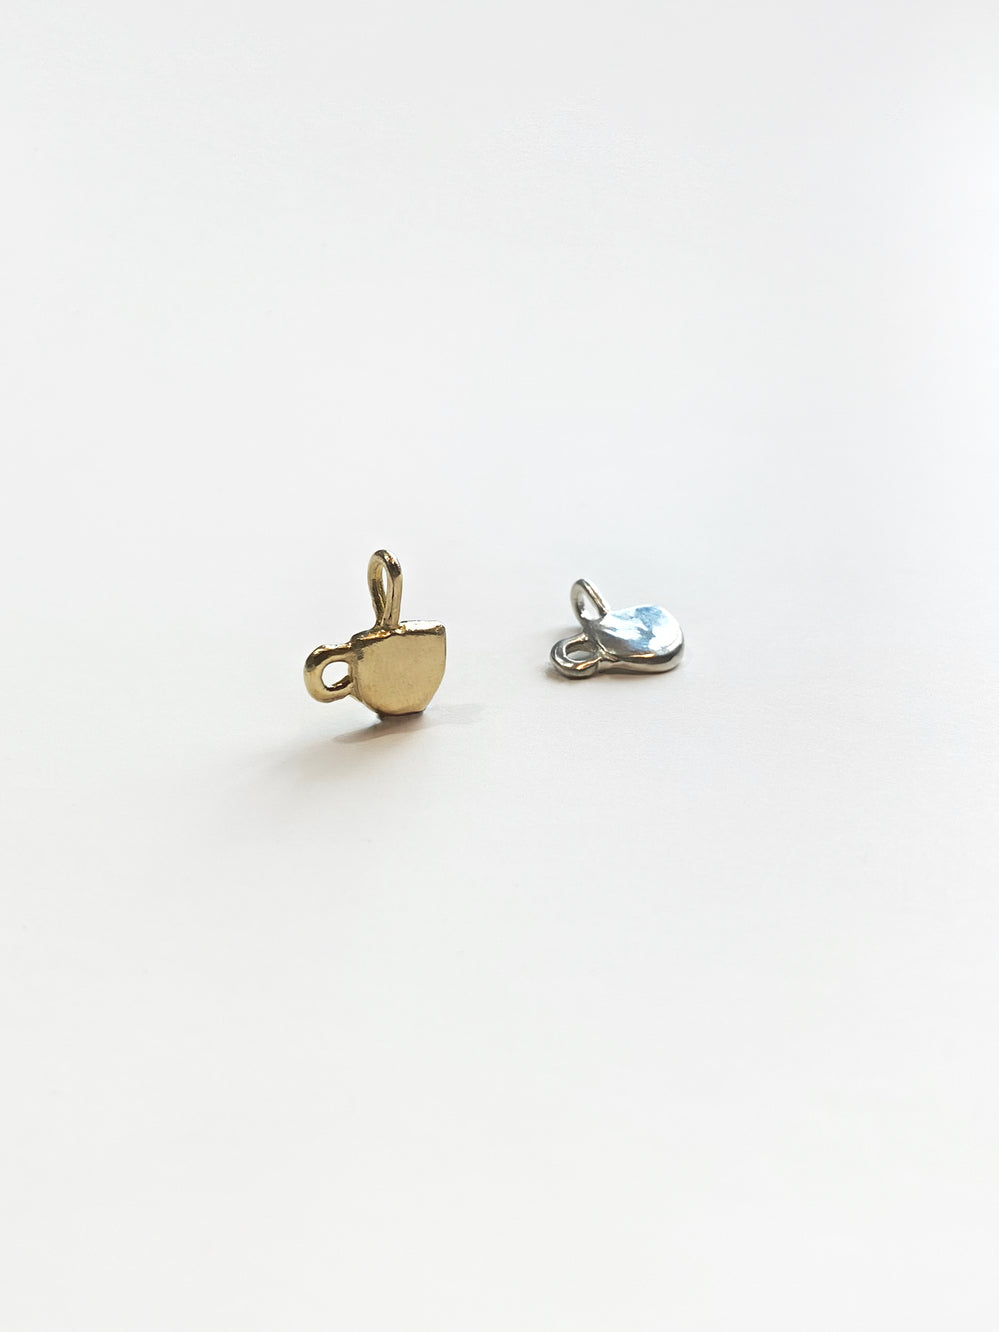 Gold and silver mug charms on white background